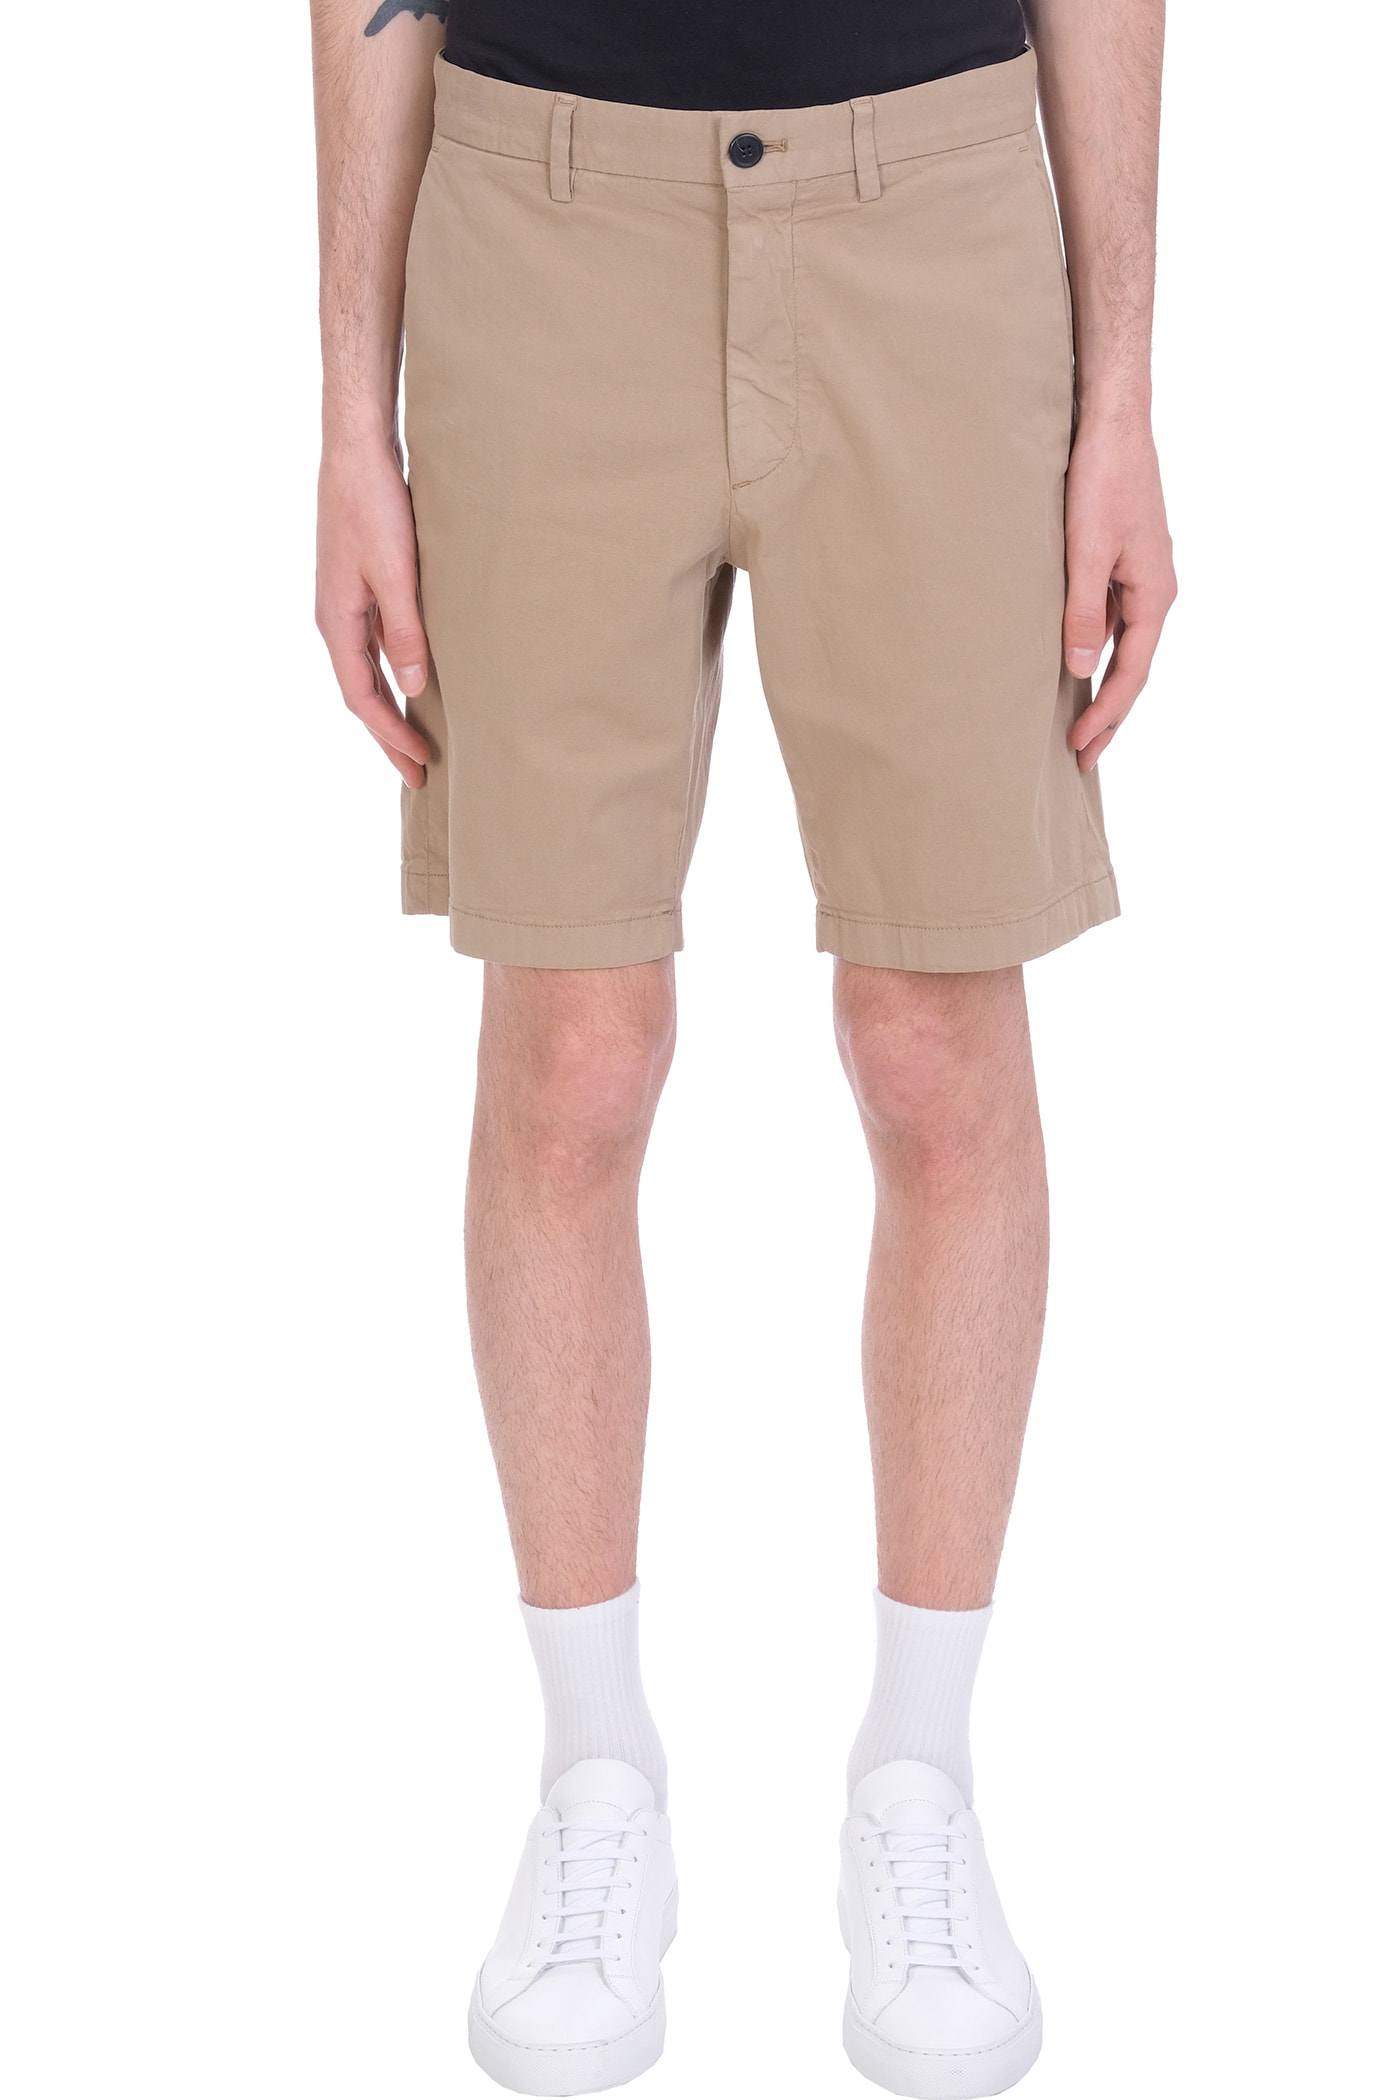 Theory Shorts In Beige Cotton